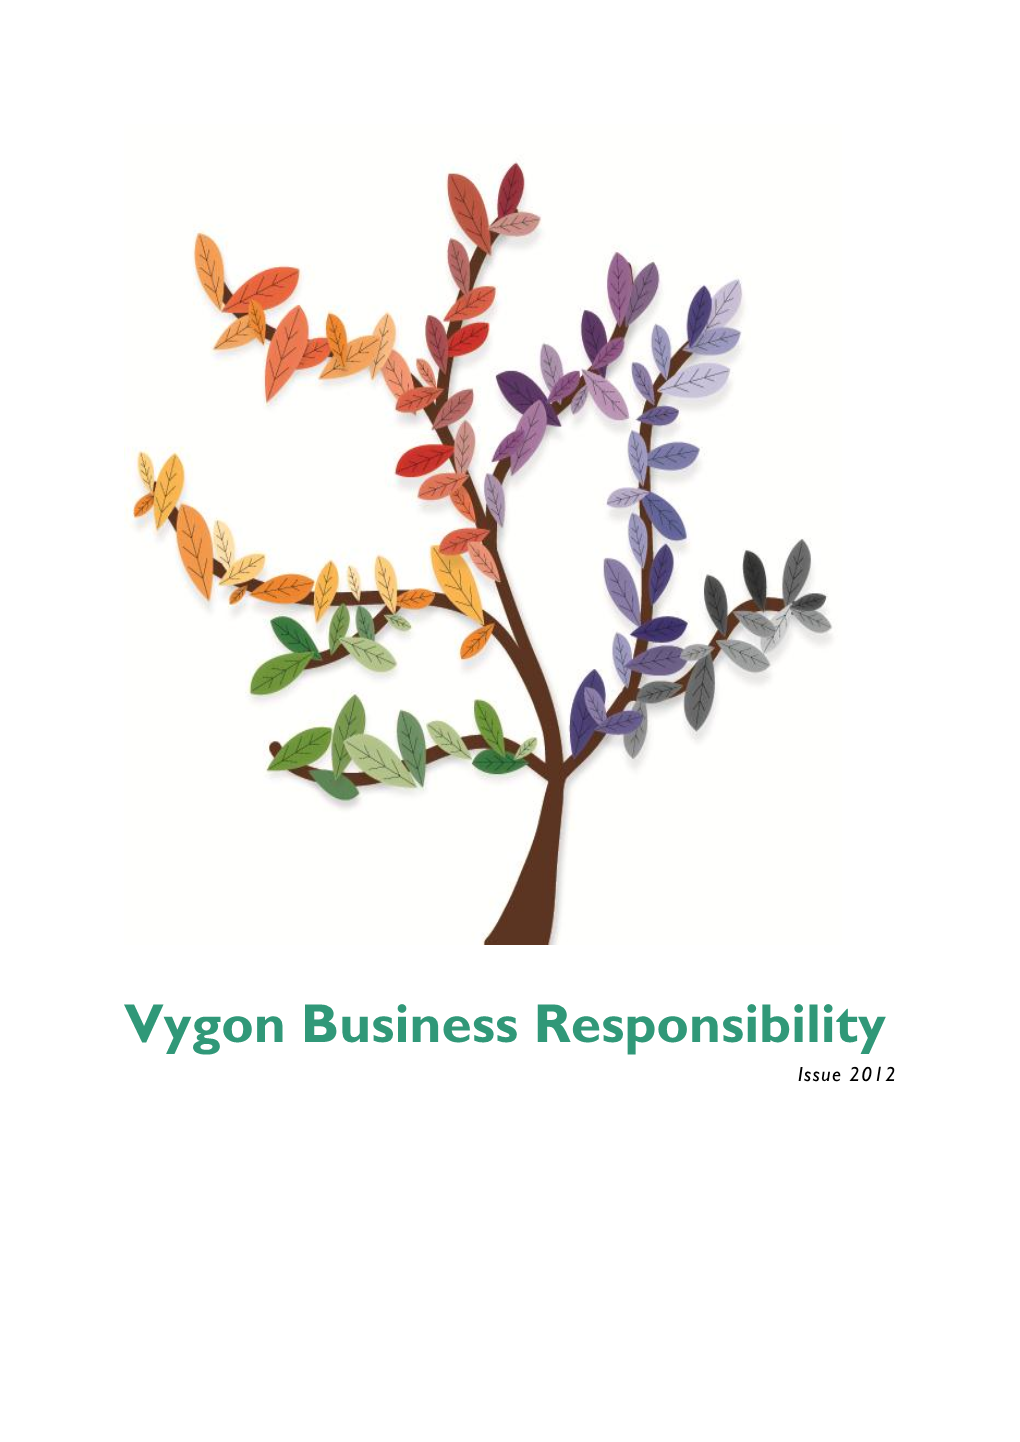 Vygon Business Responsibility Issue 2012 C ONTENT of the VYGON CSR REPORT